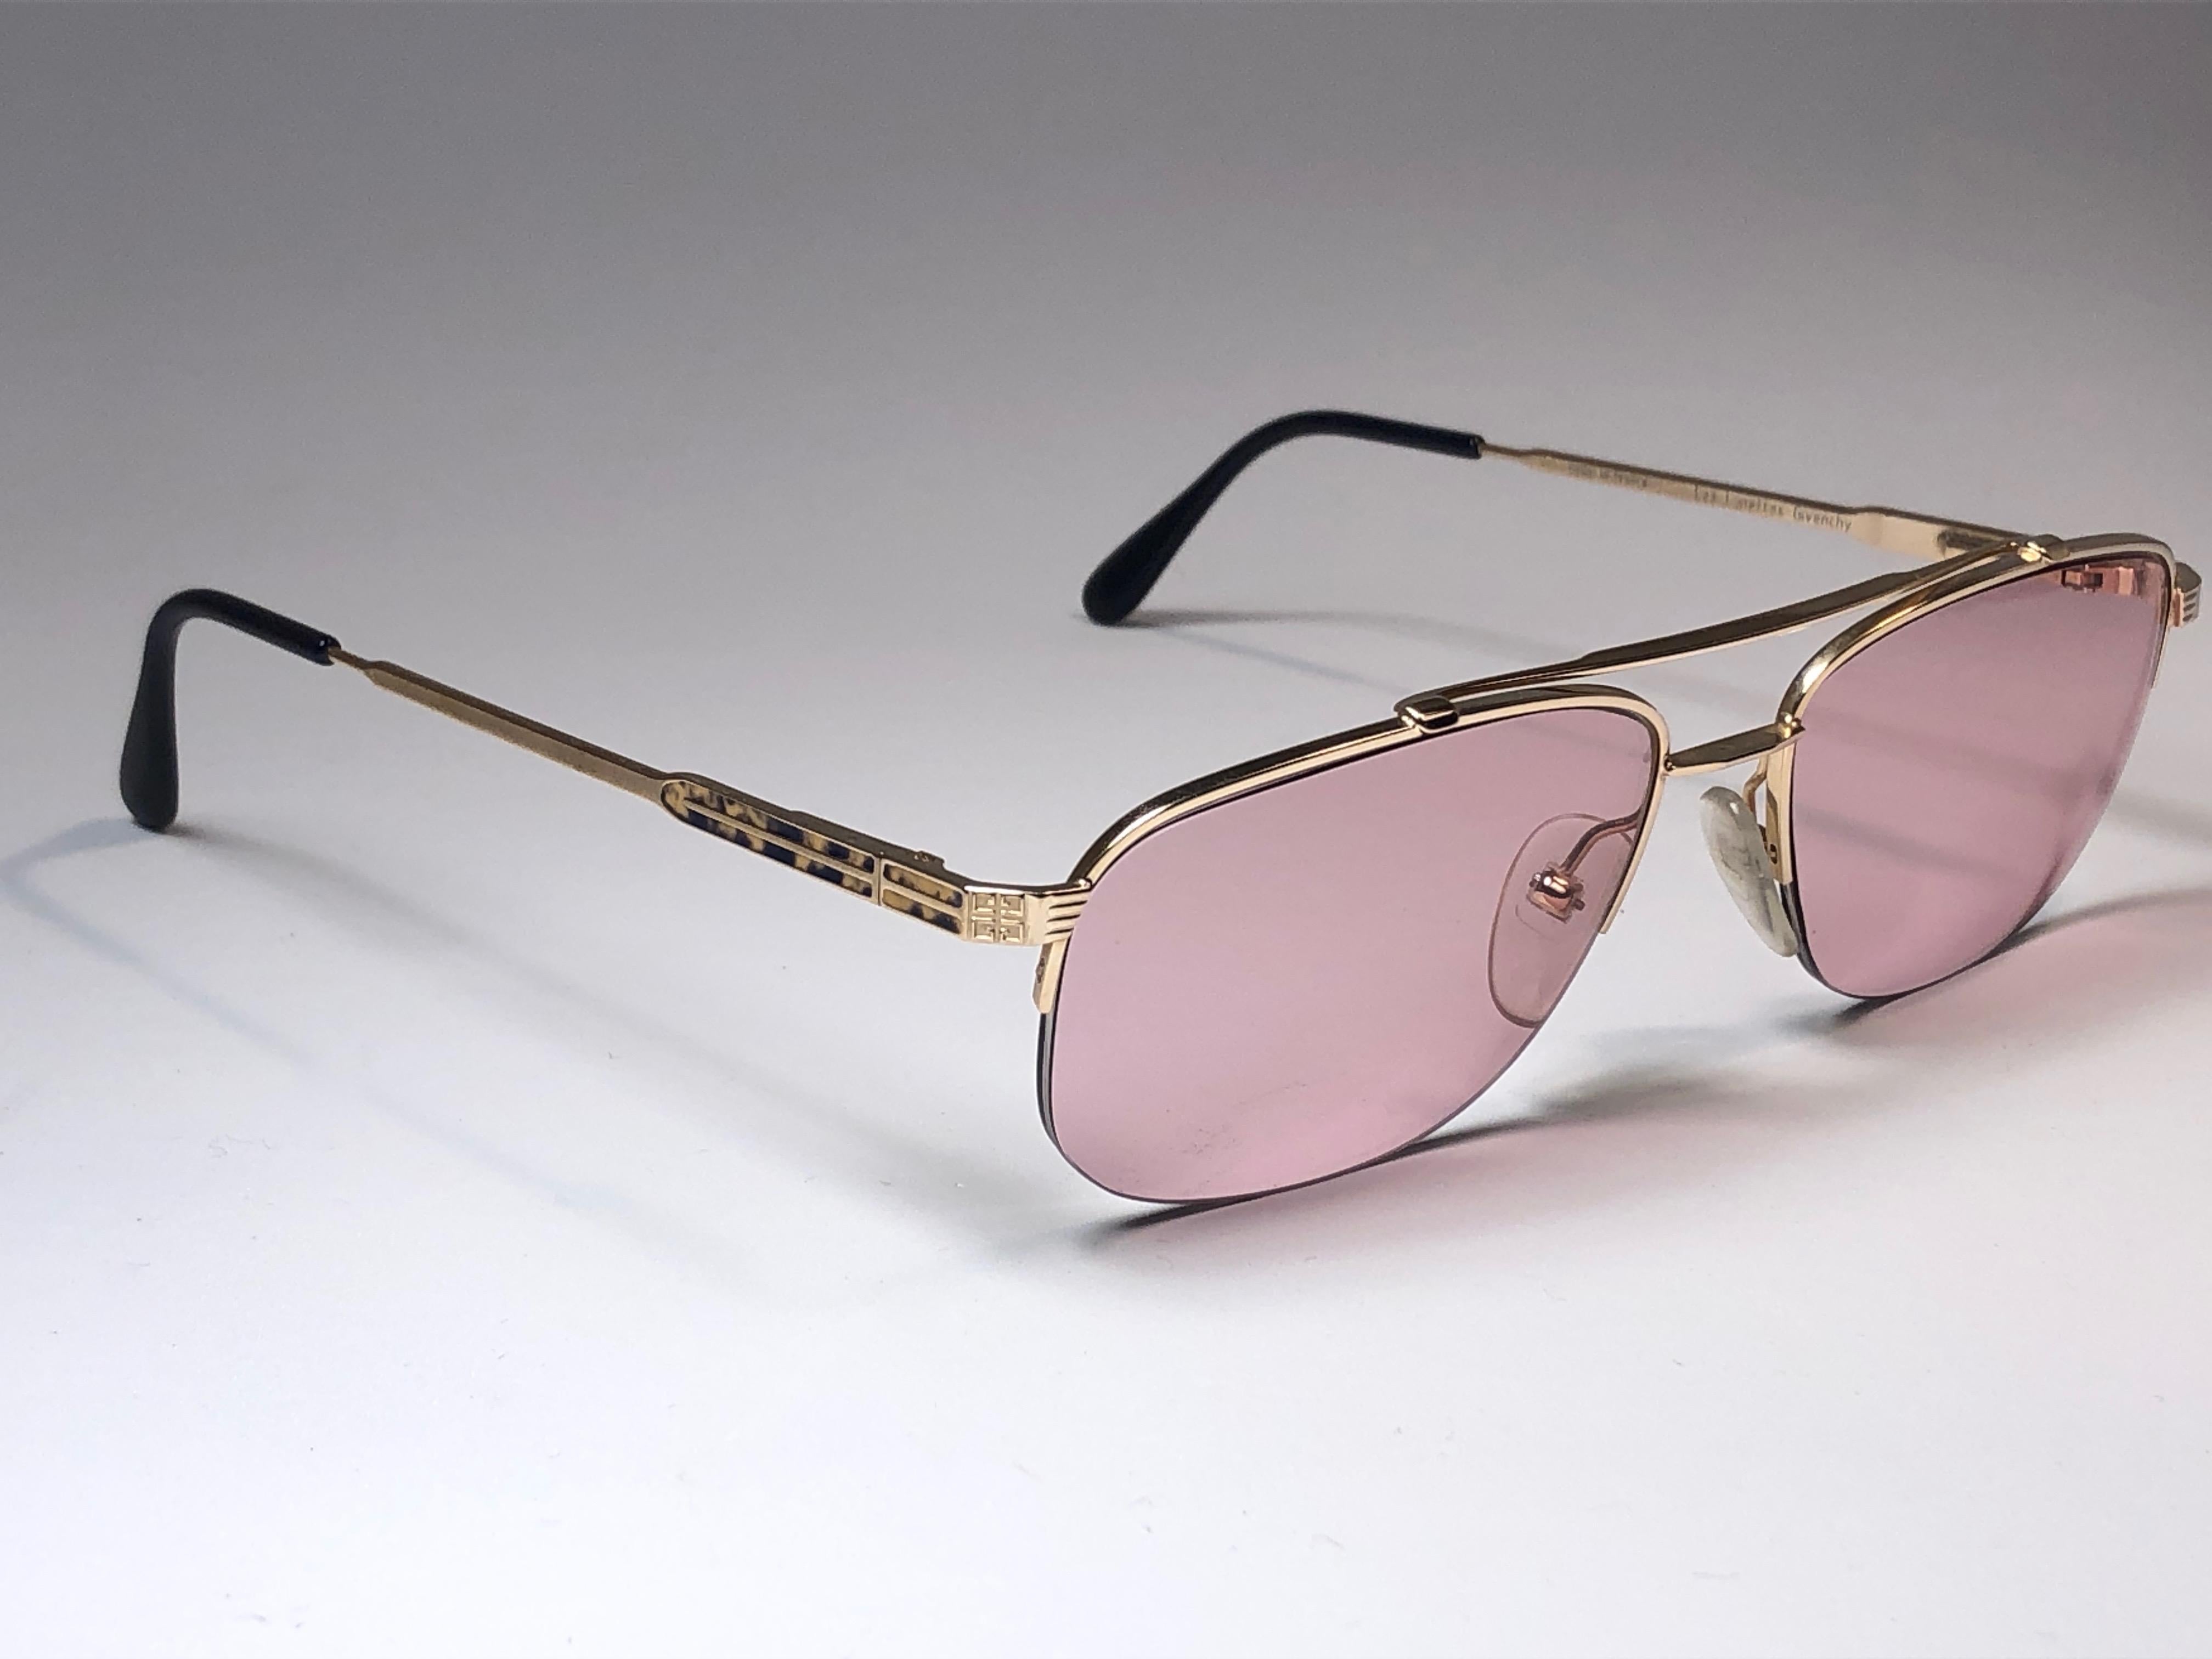 New Givenchy half frame gold plated frame. Spotless rose lenses.

Made in France.
 
Produced and design in 1990's.

This item may show minor sign of wear due to storage.